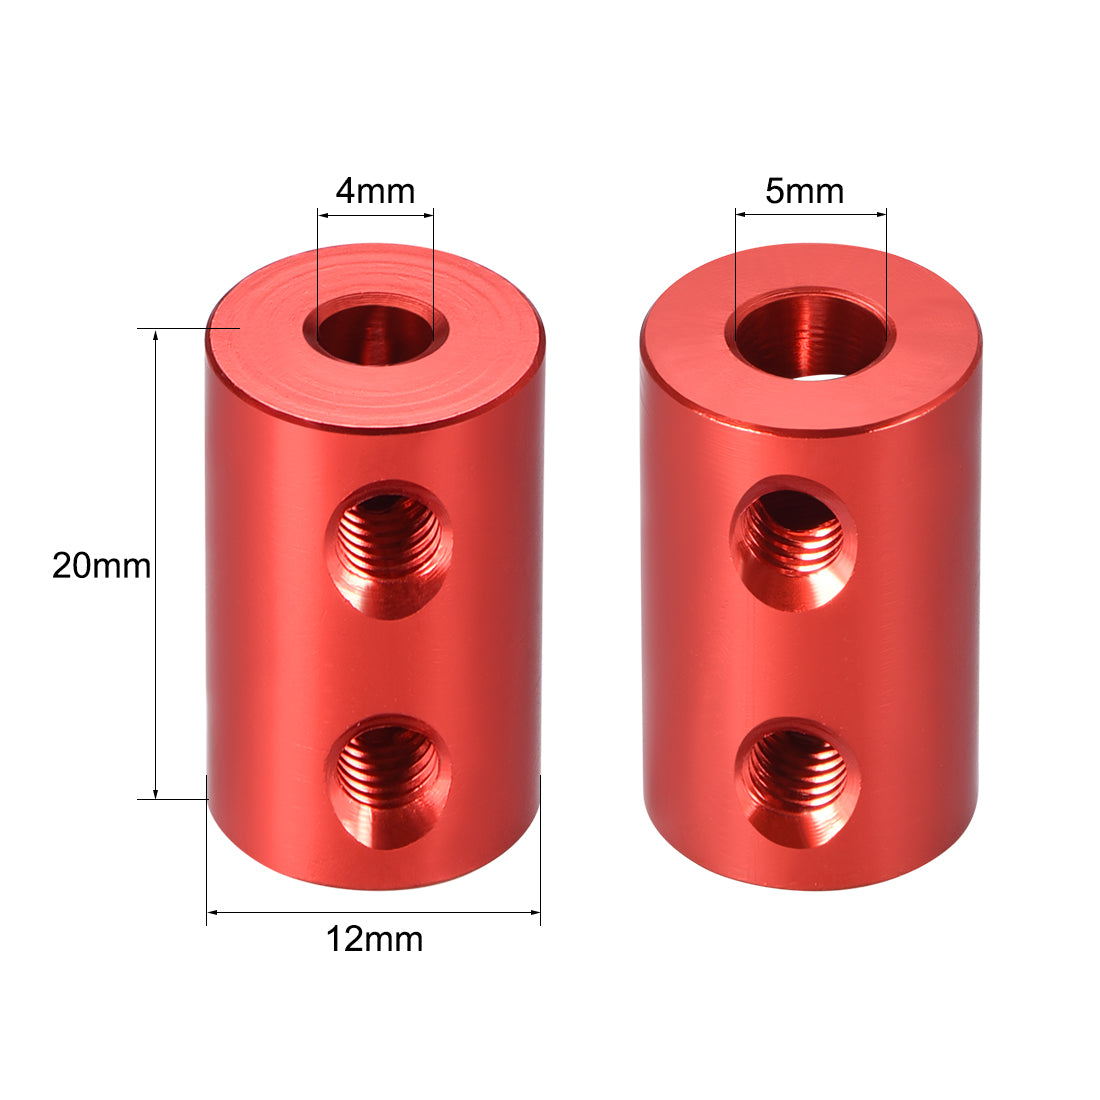 uxcell Uxcell Shaft Coupling 4mm to 5mm Bore L20xD12 Robot Motor Wheel Rigid Coupler Connector Red